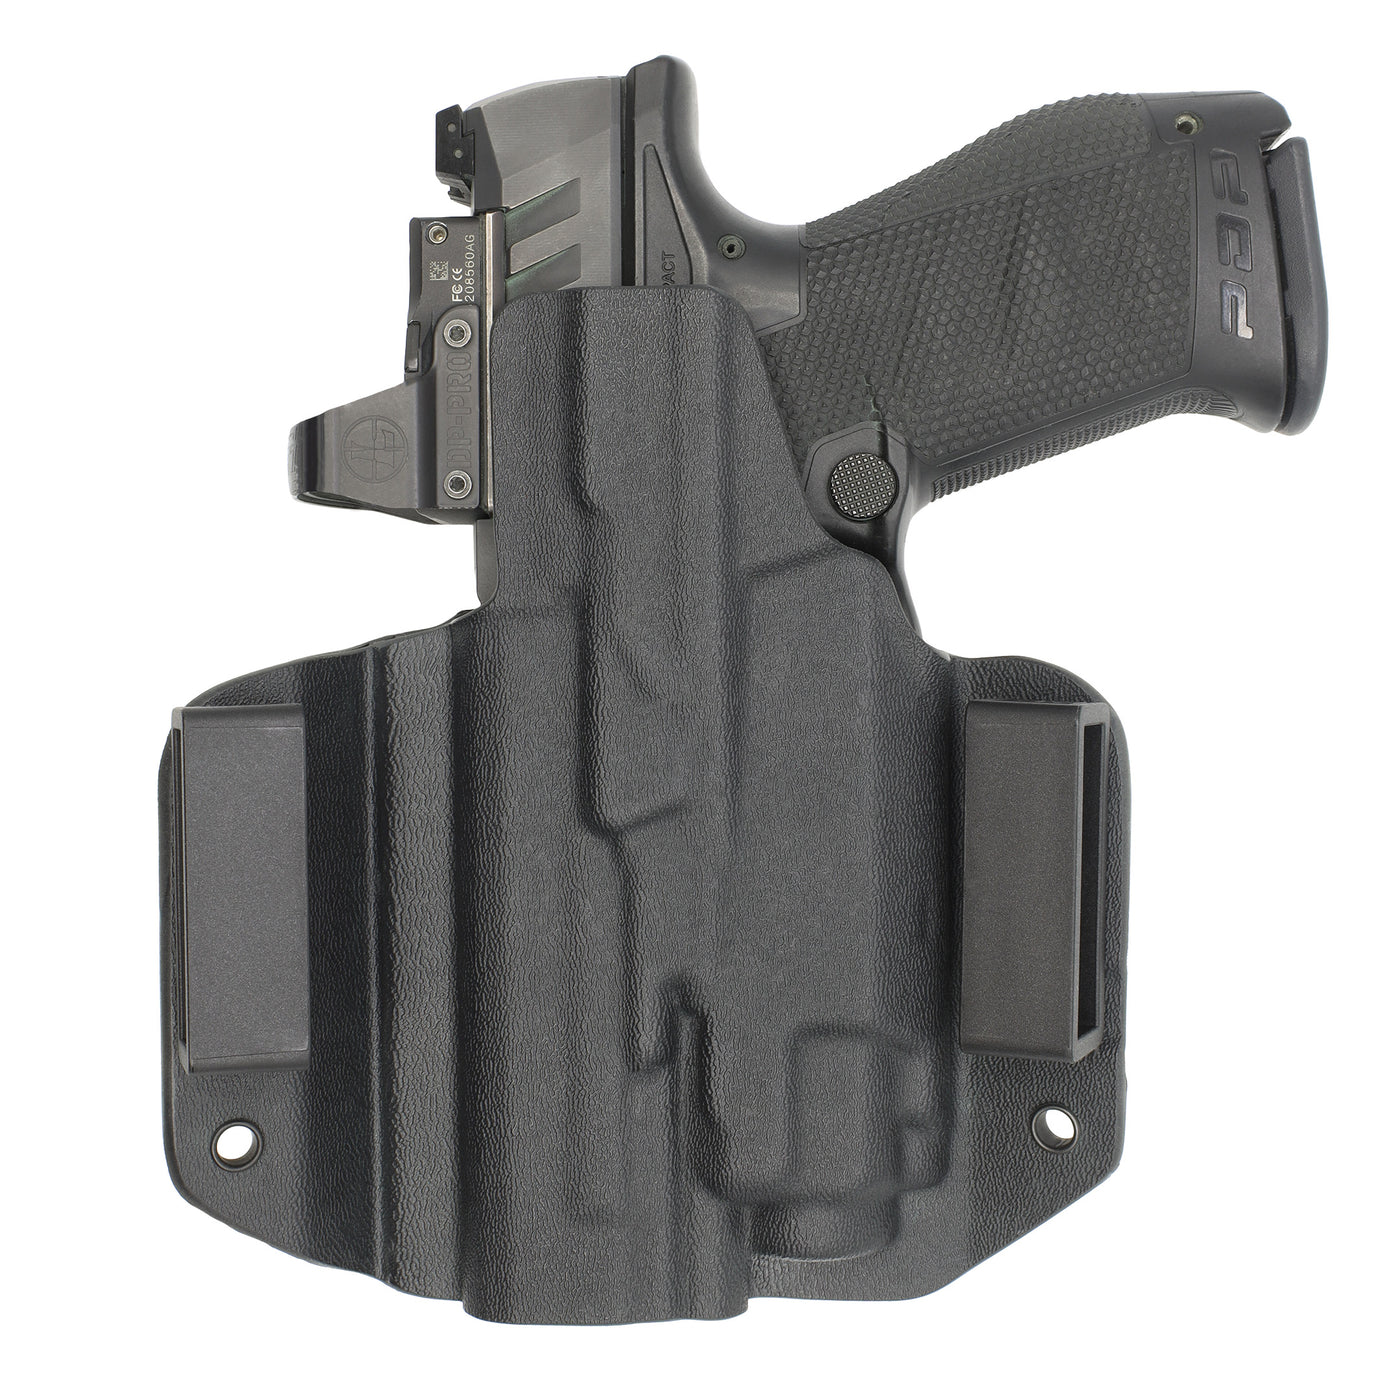 C&G Holsters Quickship OWB Tactical FN 509 streamlight TLR8 holstered back view